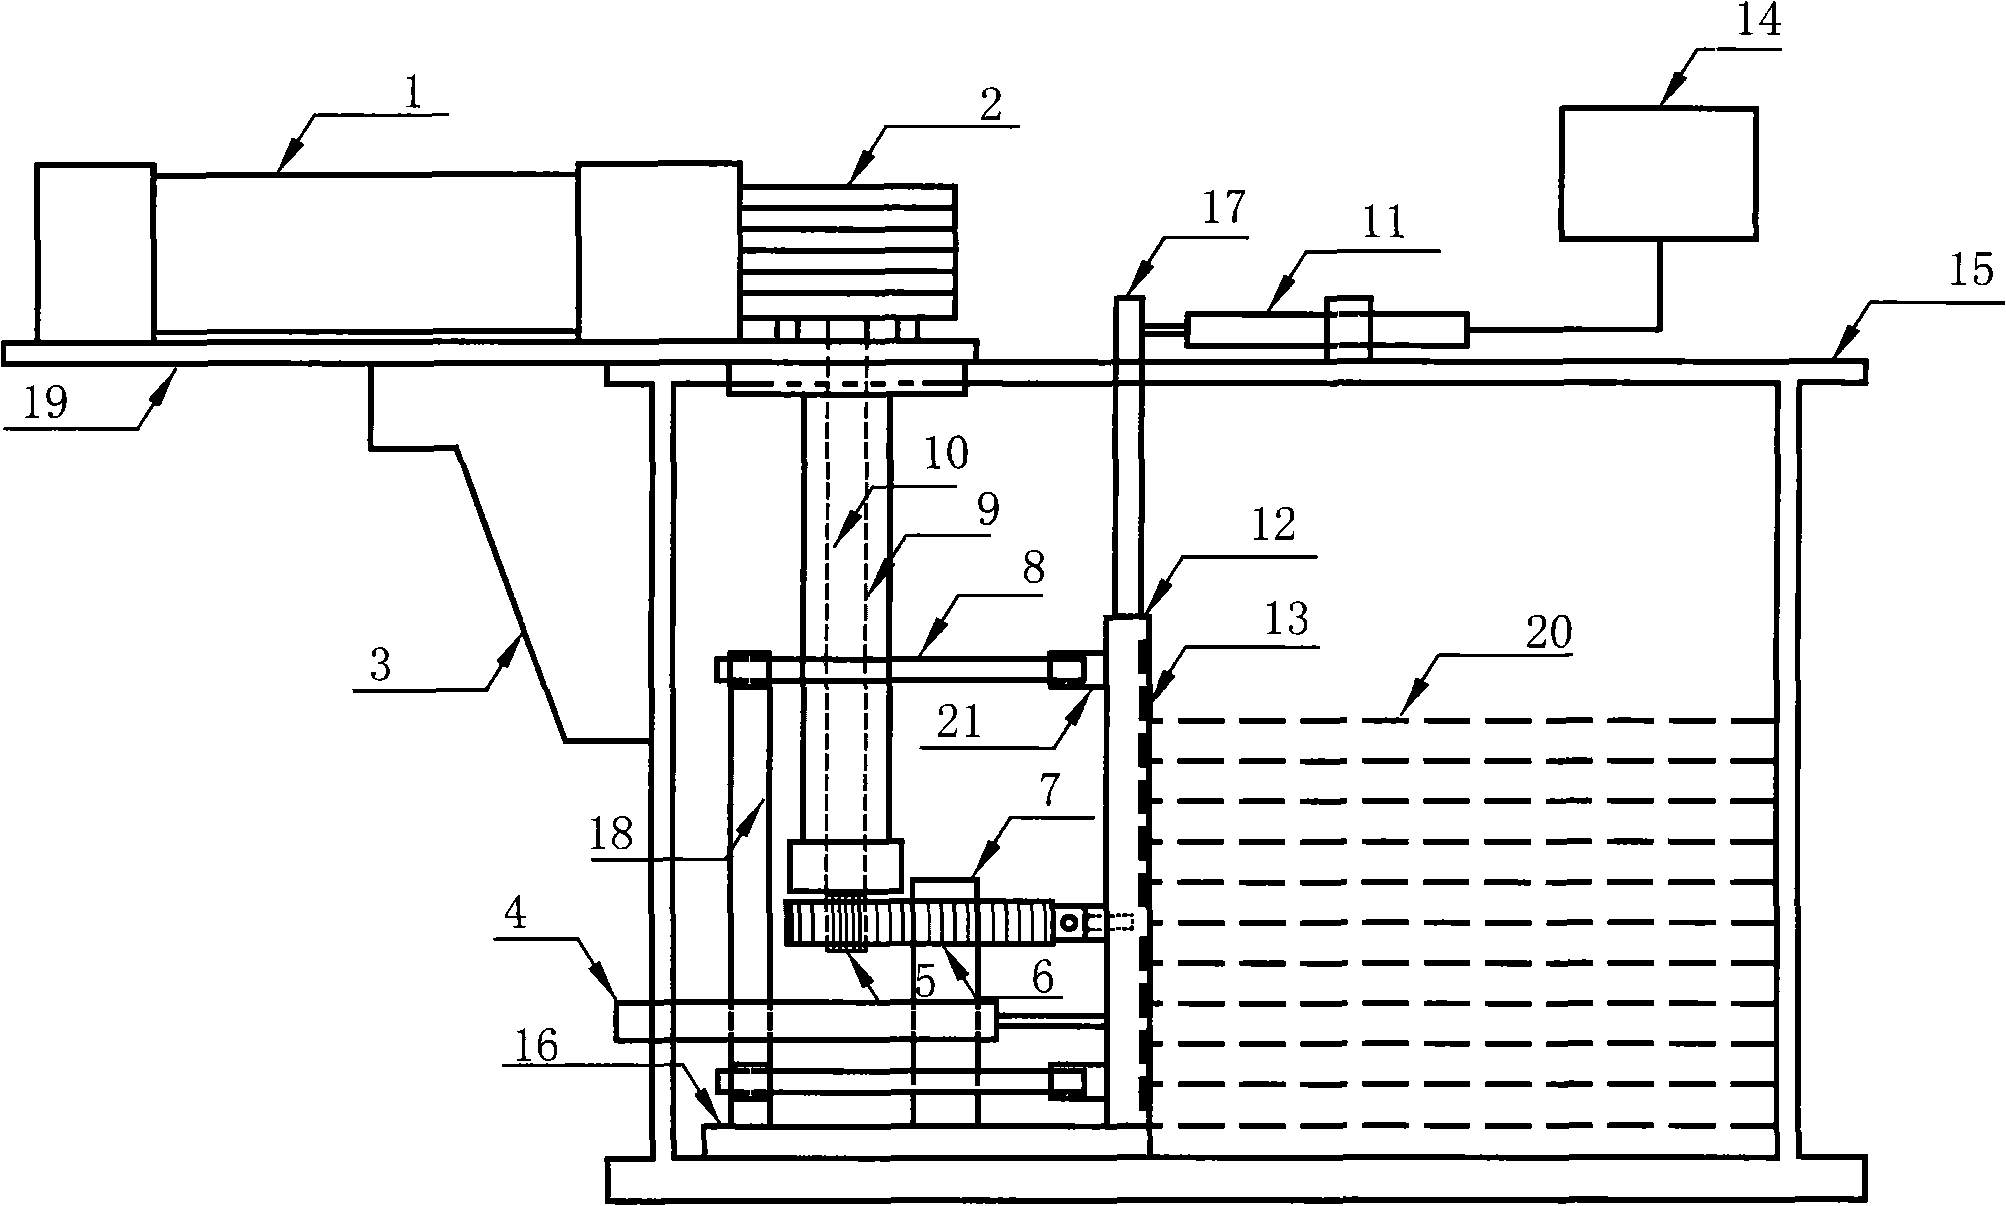 Centrifugal model retaining wall test device